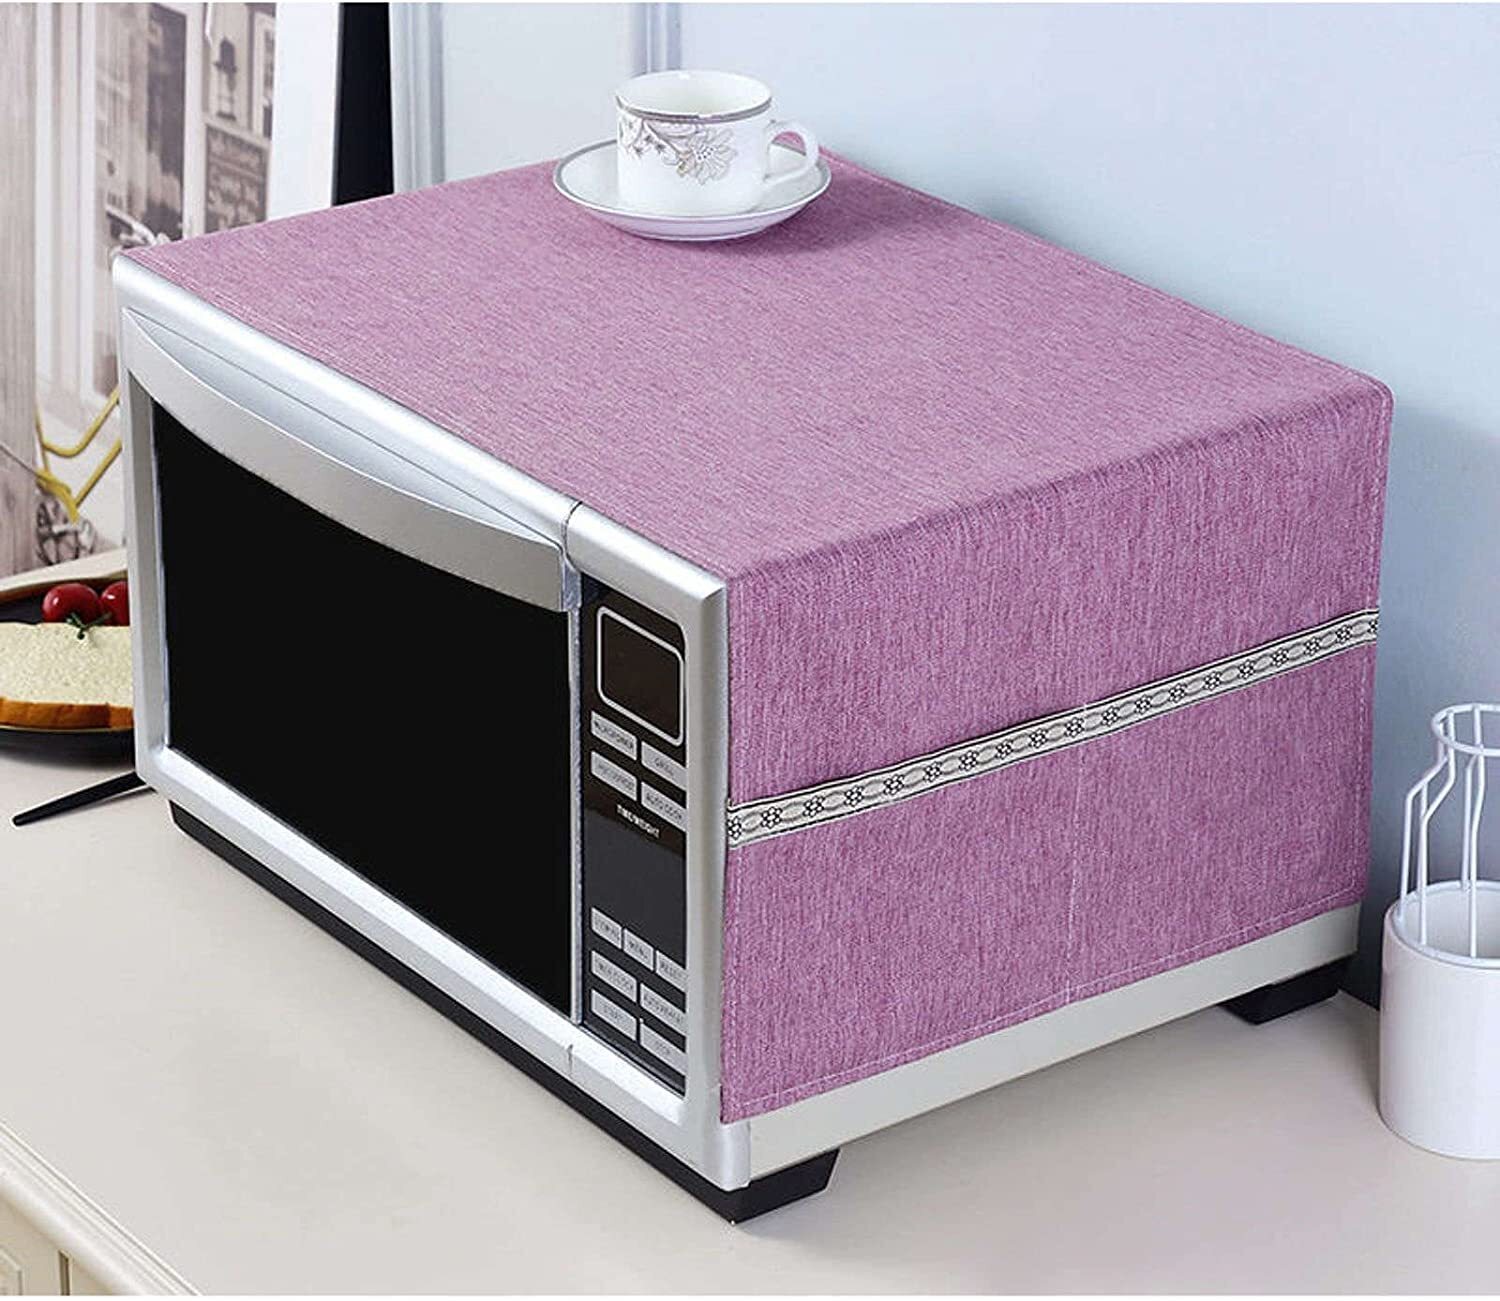 Purple Microwave Oven Cover